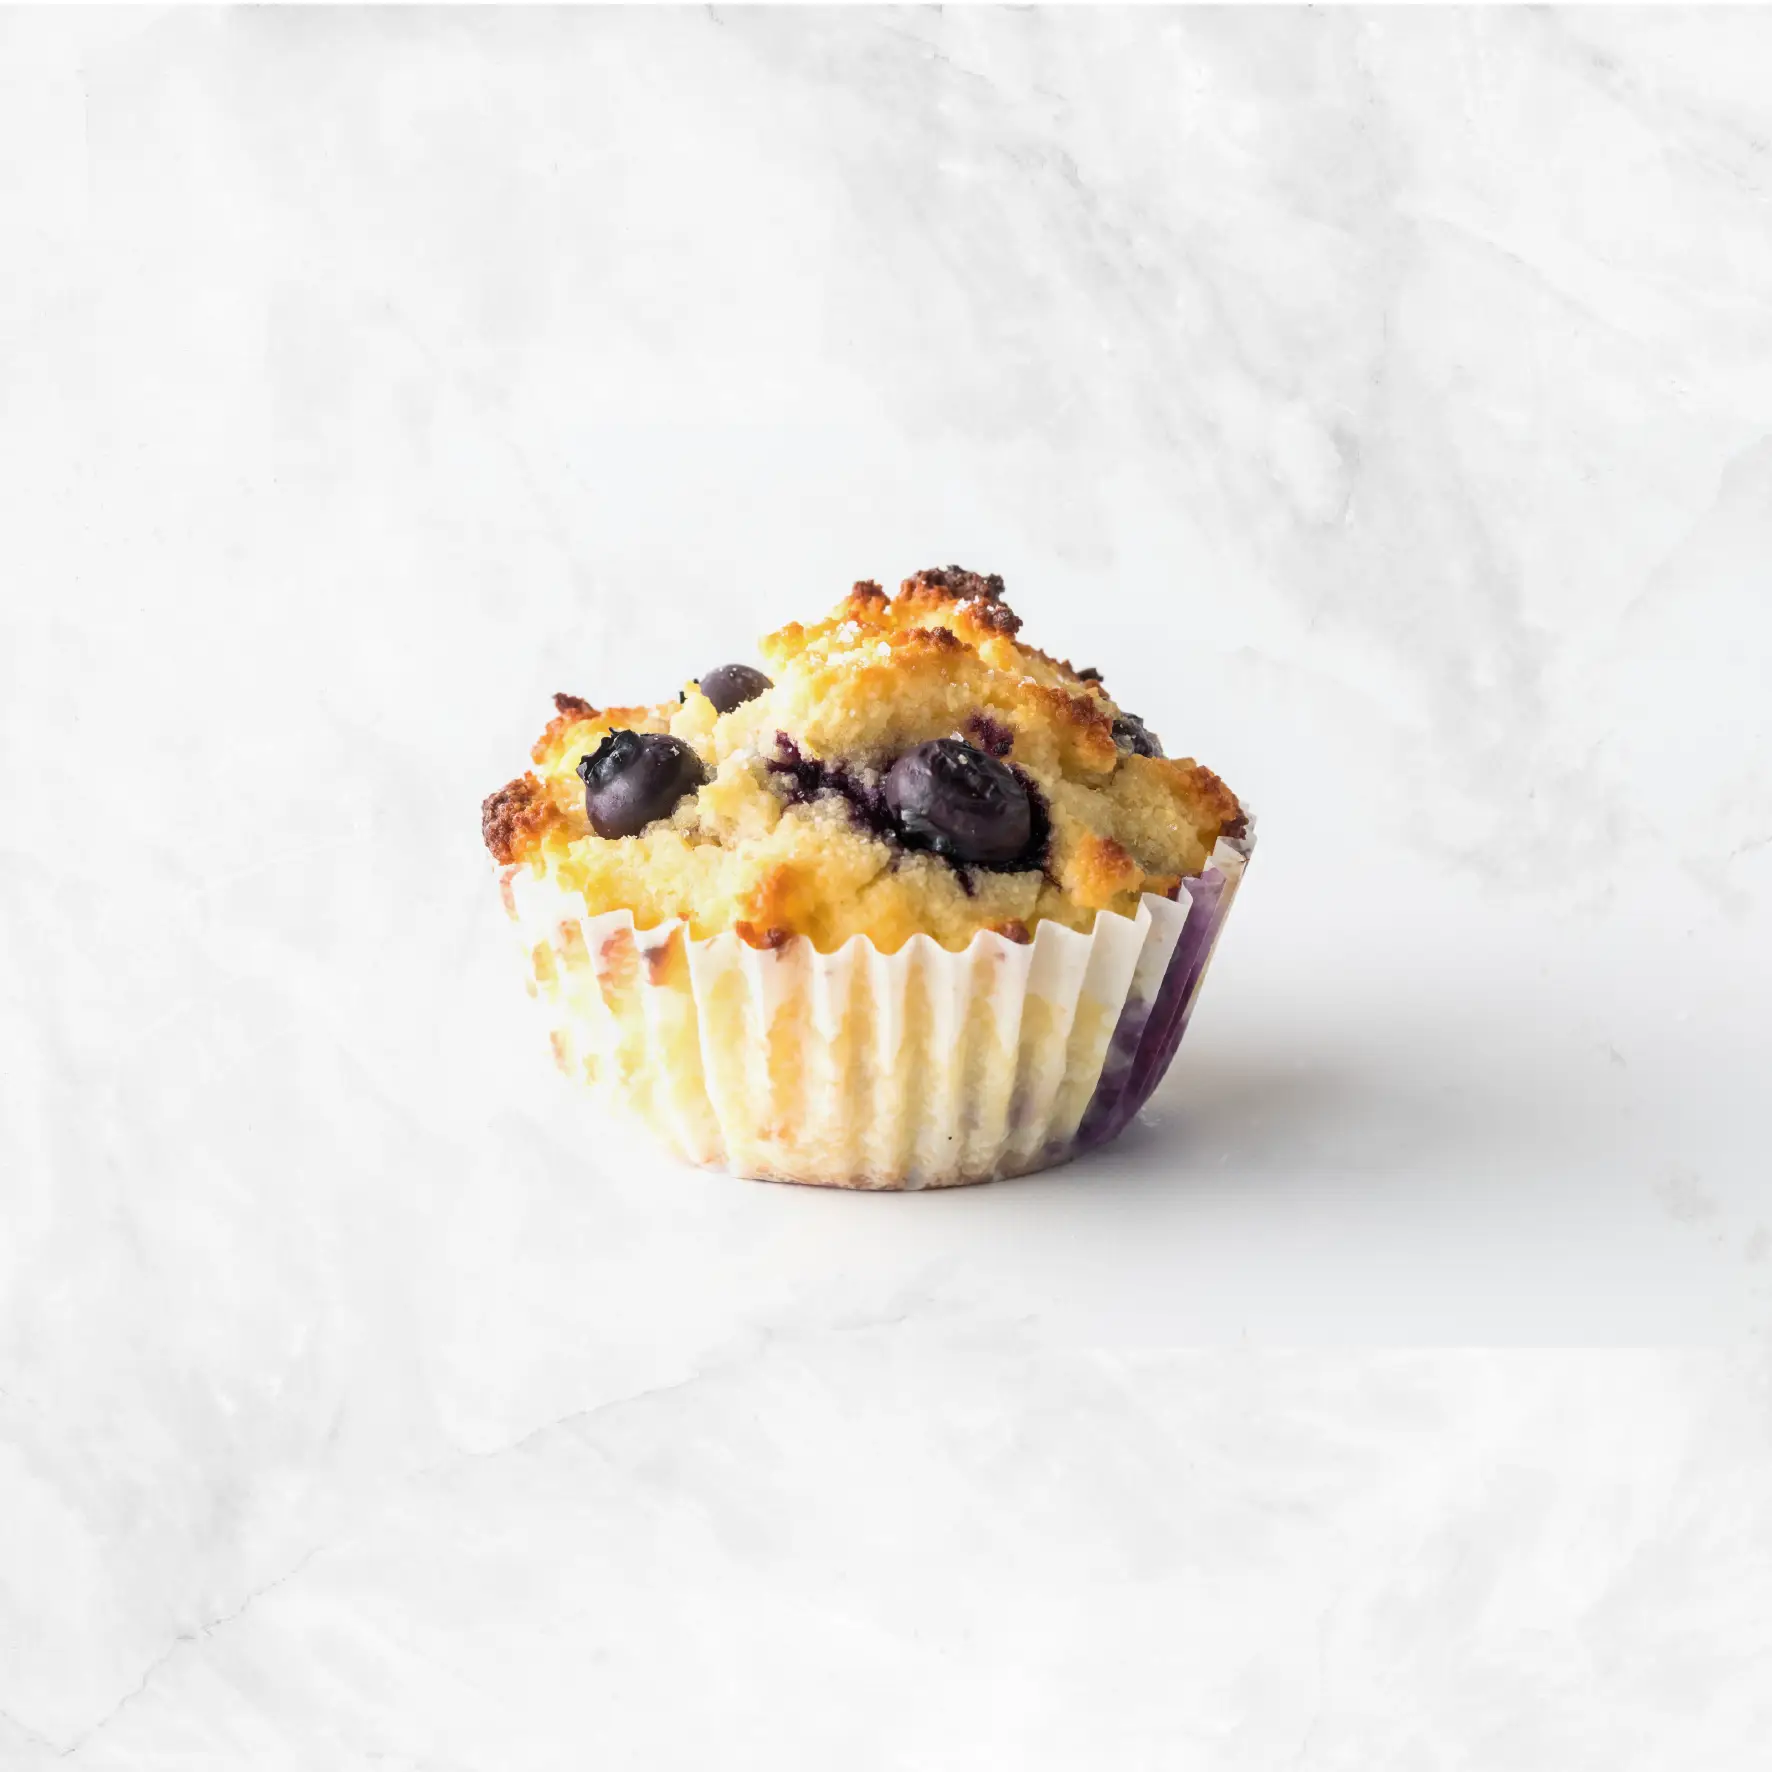 Keto Blueberry Muffin Delivery